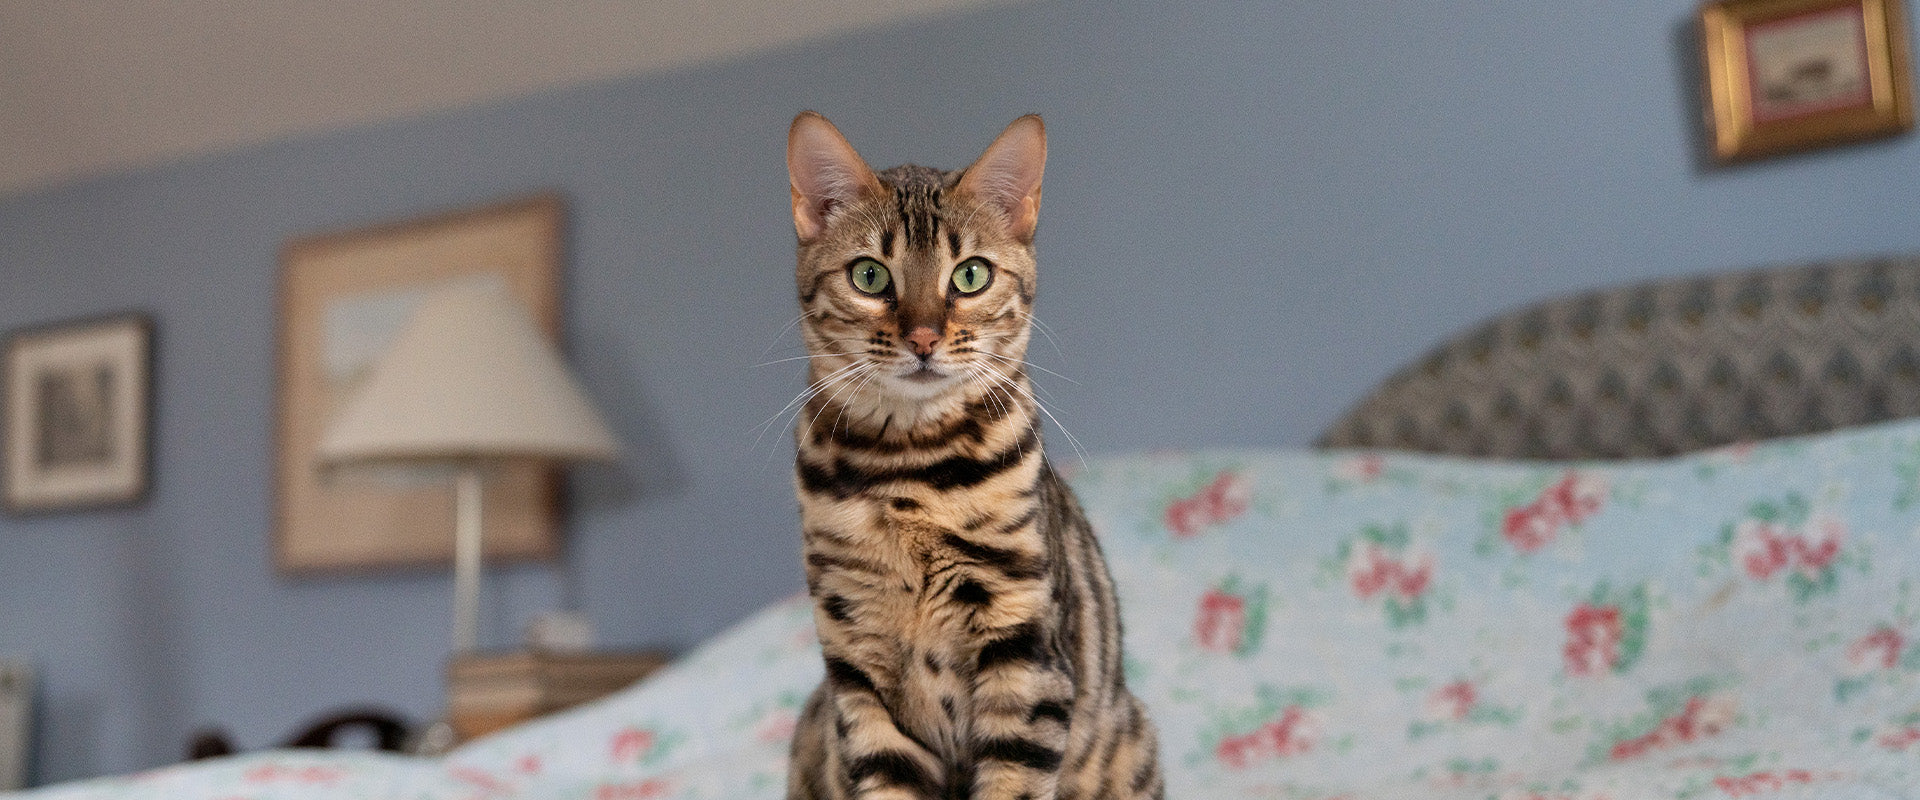 A tabby cat with striking green eyes sitting on a bed with floral bedding, in a room with blue walls and traditional decor, including framed pictures and a table lamp.